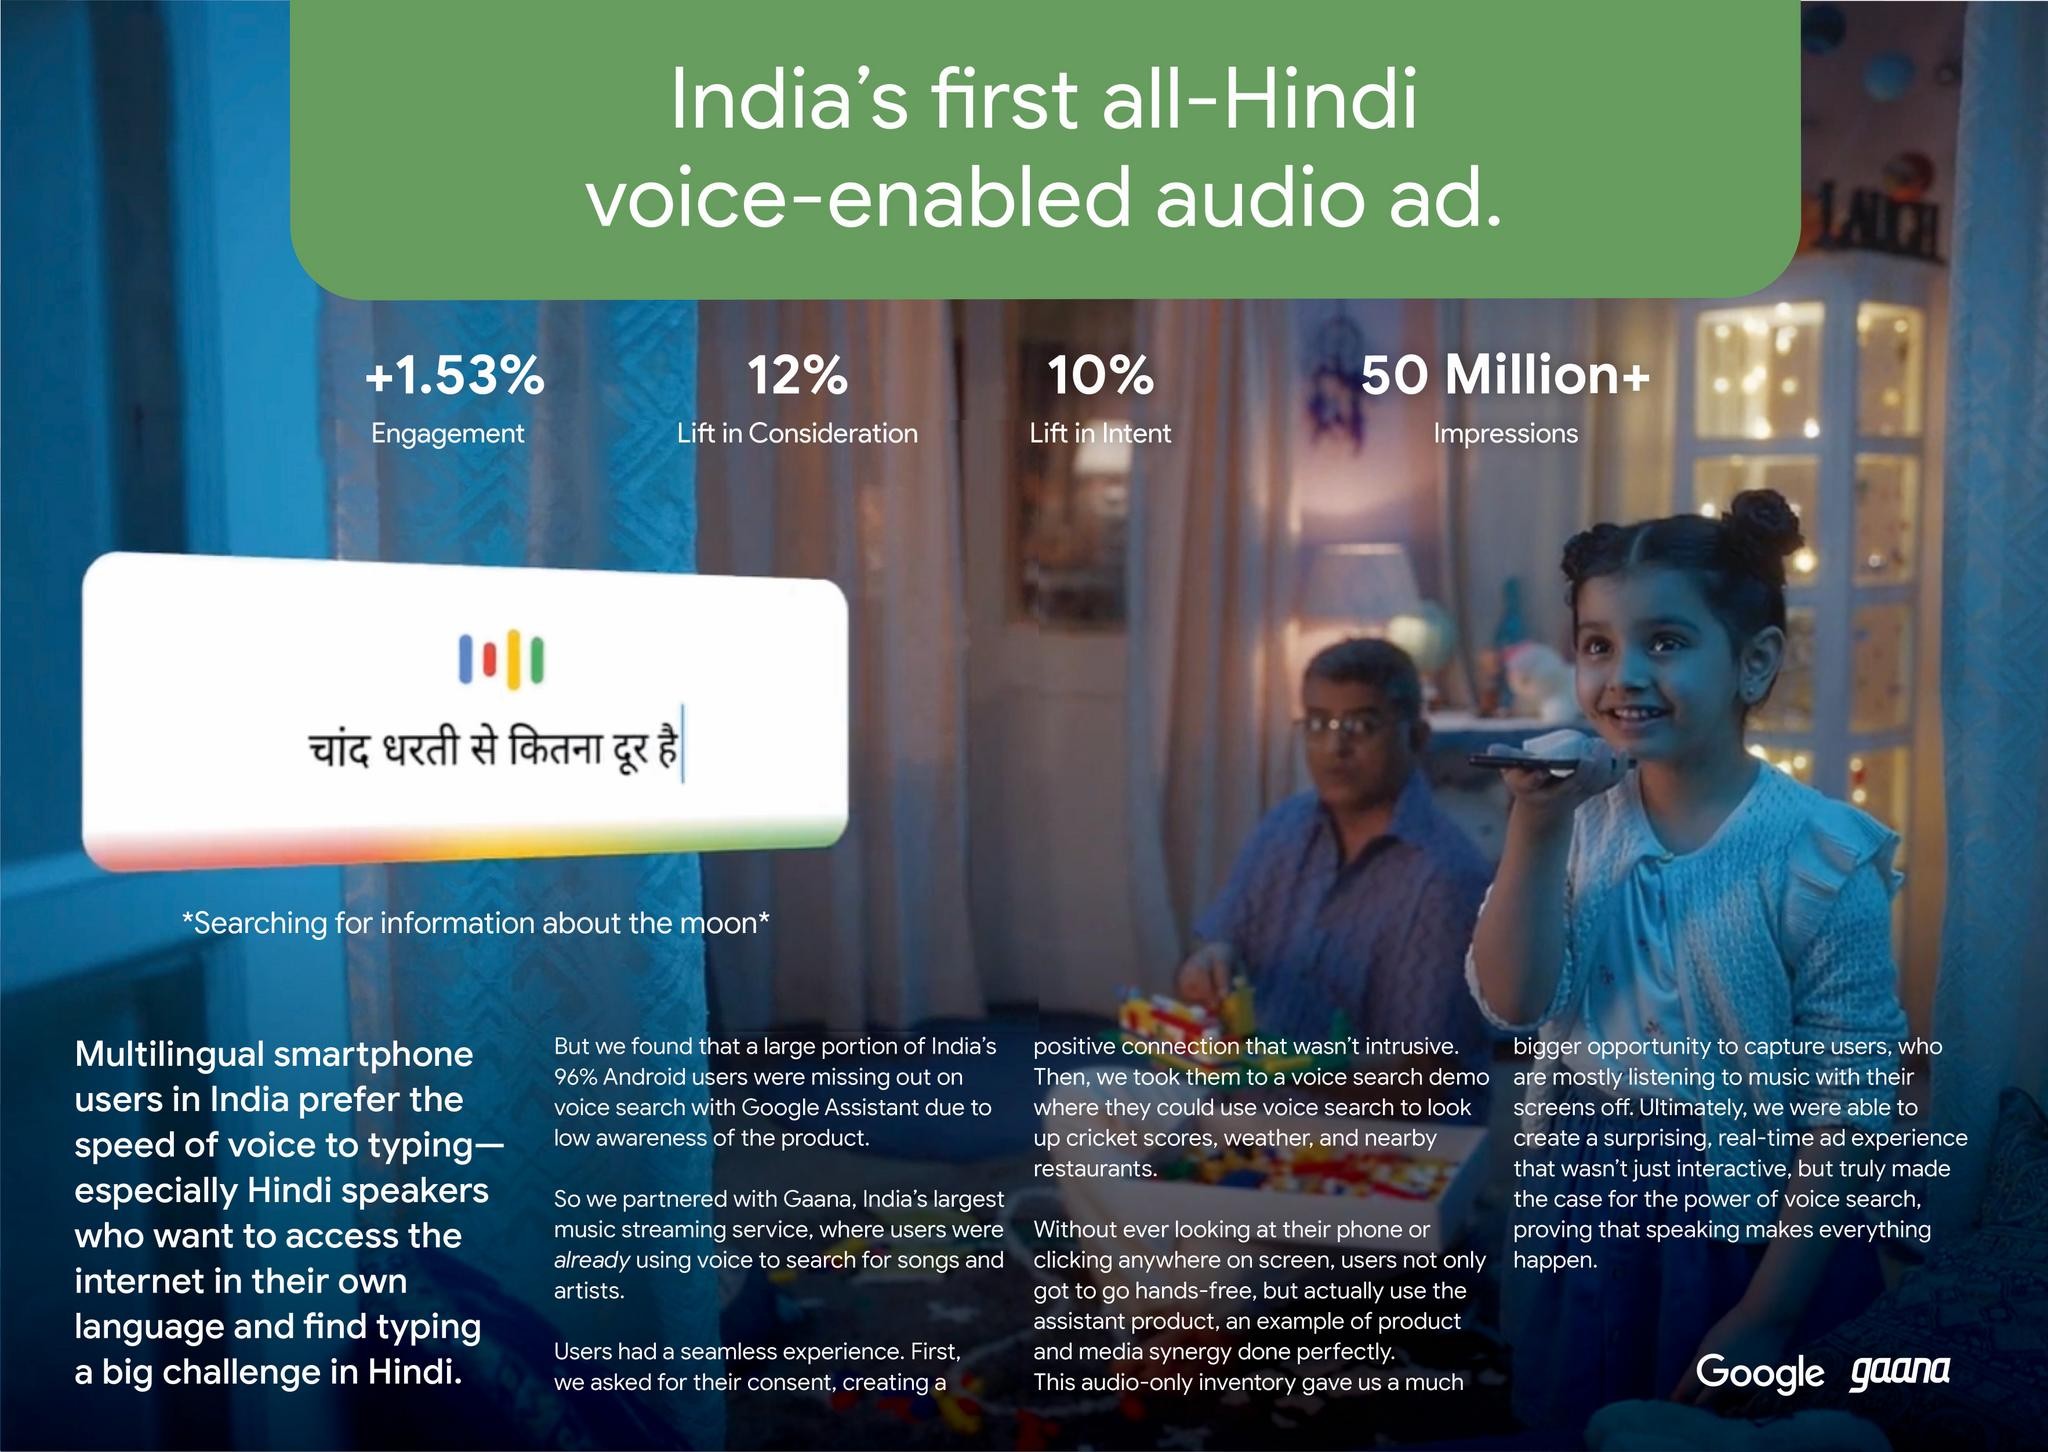 Google: Voice-Enabled Audio Ad